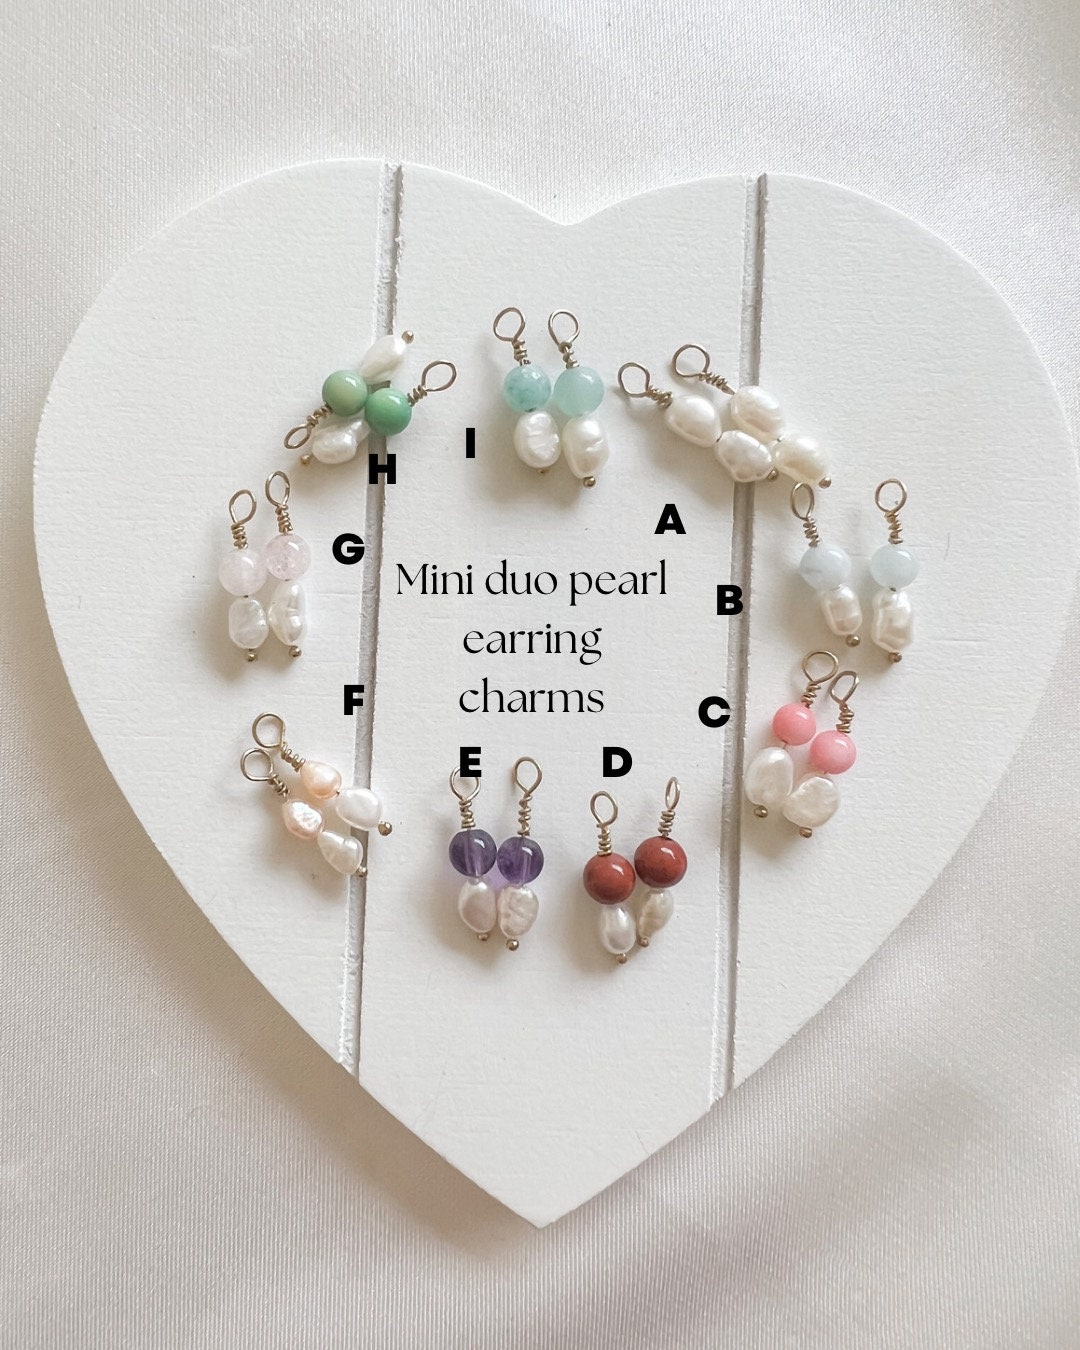 Build Your Own Polymer Clay Earrings Kit Including Charms and